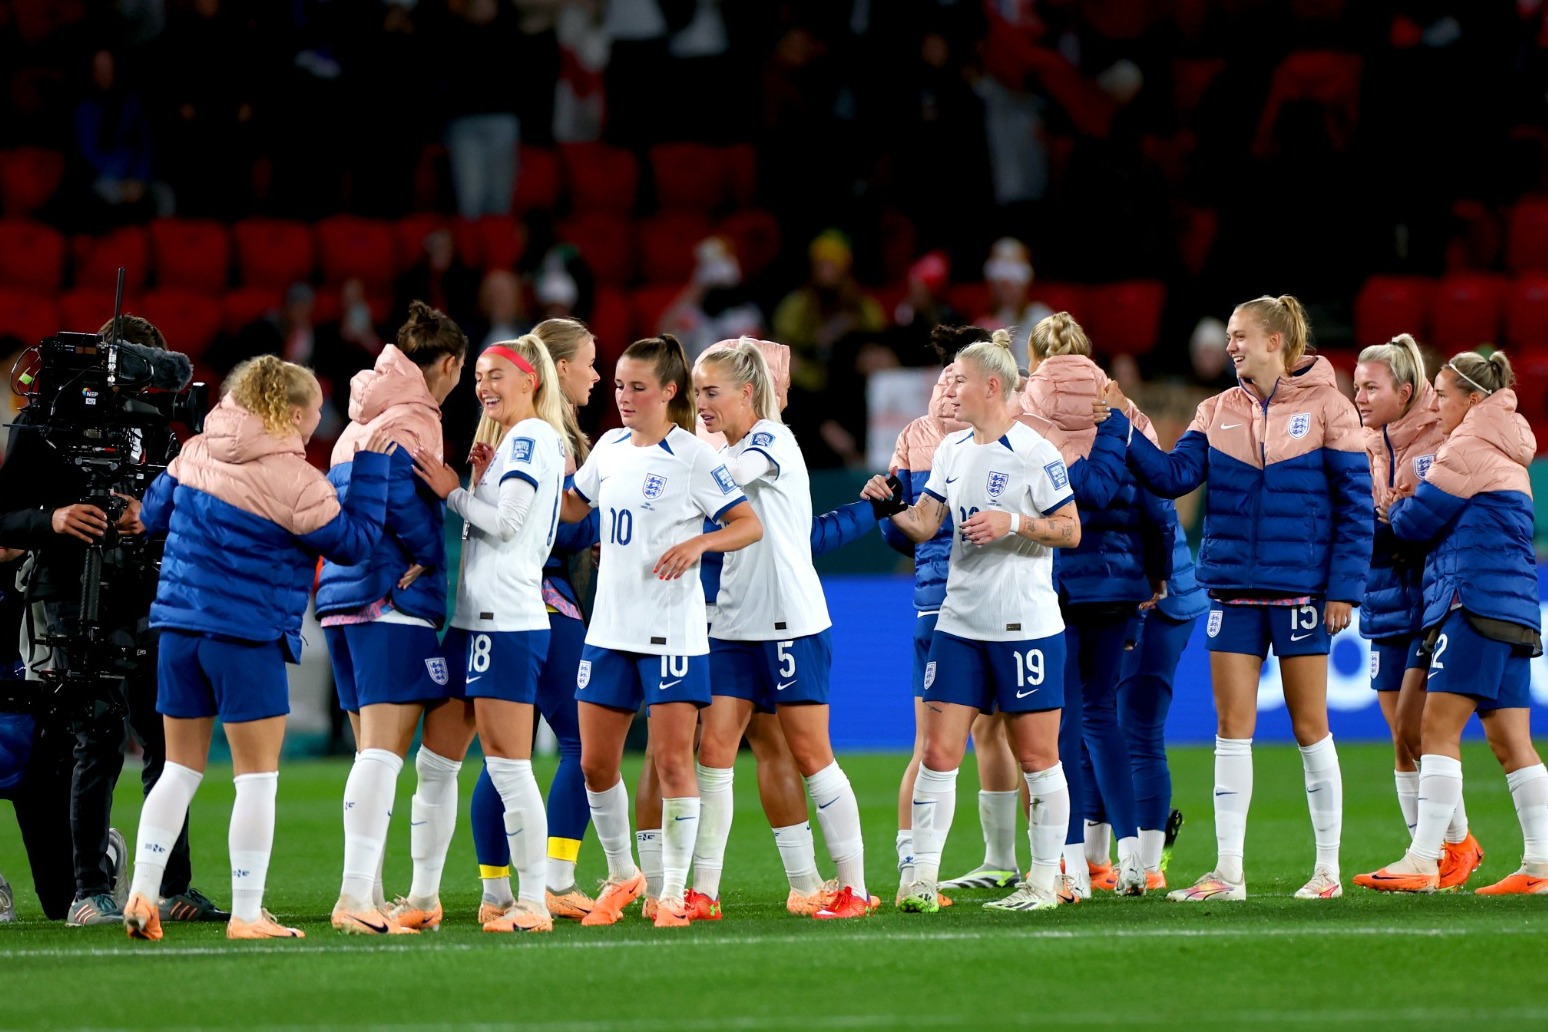 Lauren James stars as England crush China to reach last 16 of Women’s World Cup 